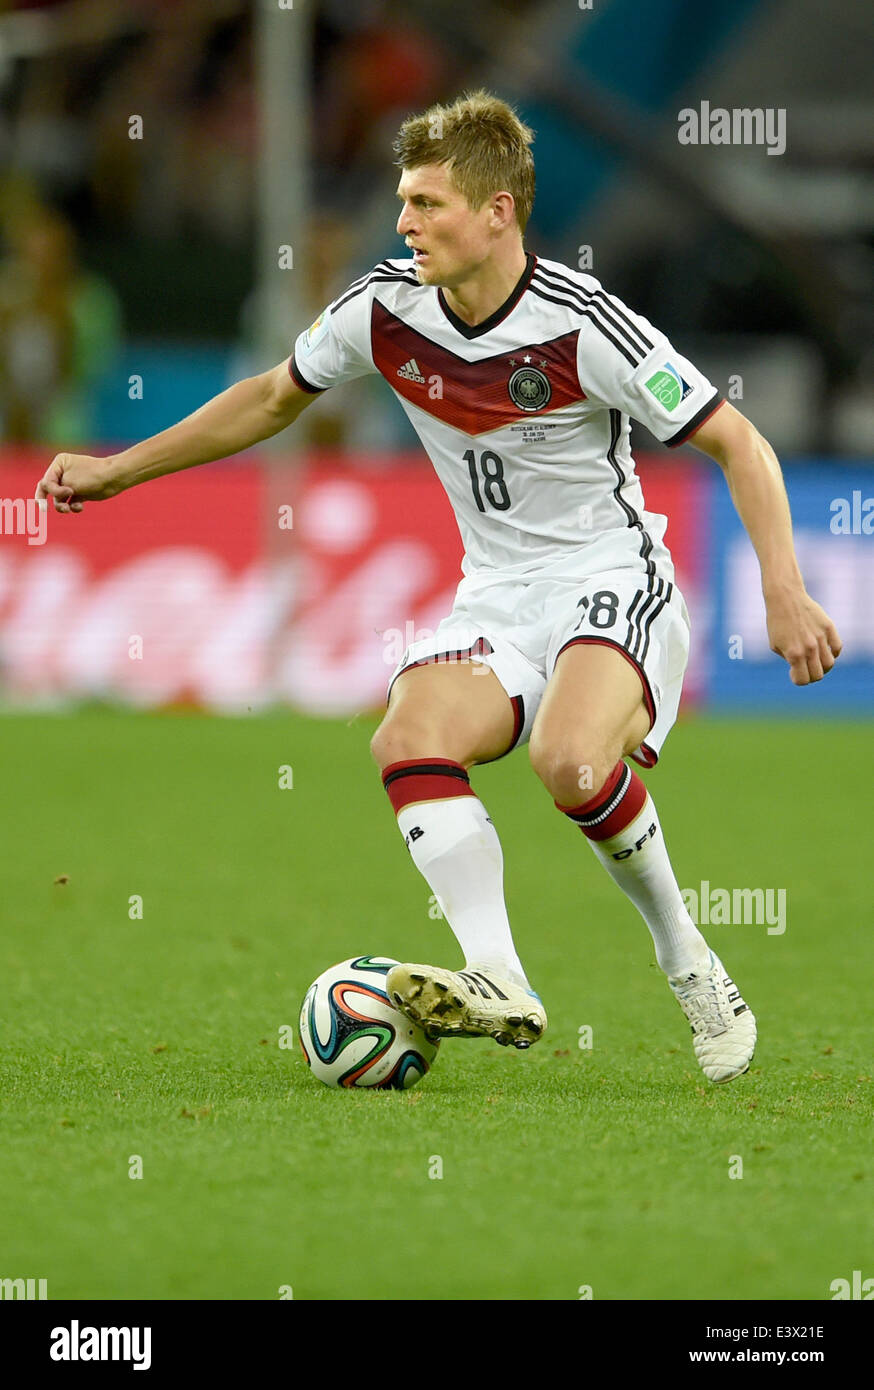 Porto Alegre, Brazil. 30th June, 2014. Germany's Toni Kroos in action during the FIFA World Cup 2014 round of 16 soccer match between Germany and Algeria at the Estadio Beira-Rio in Porto Alegre, Brazil, 30 June 2014. Photo: Andreas Gebert/dpa/Alamy Live News Stock Photo